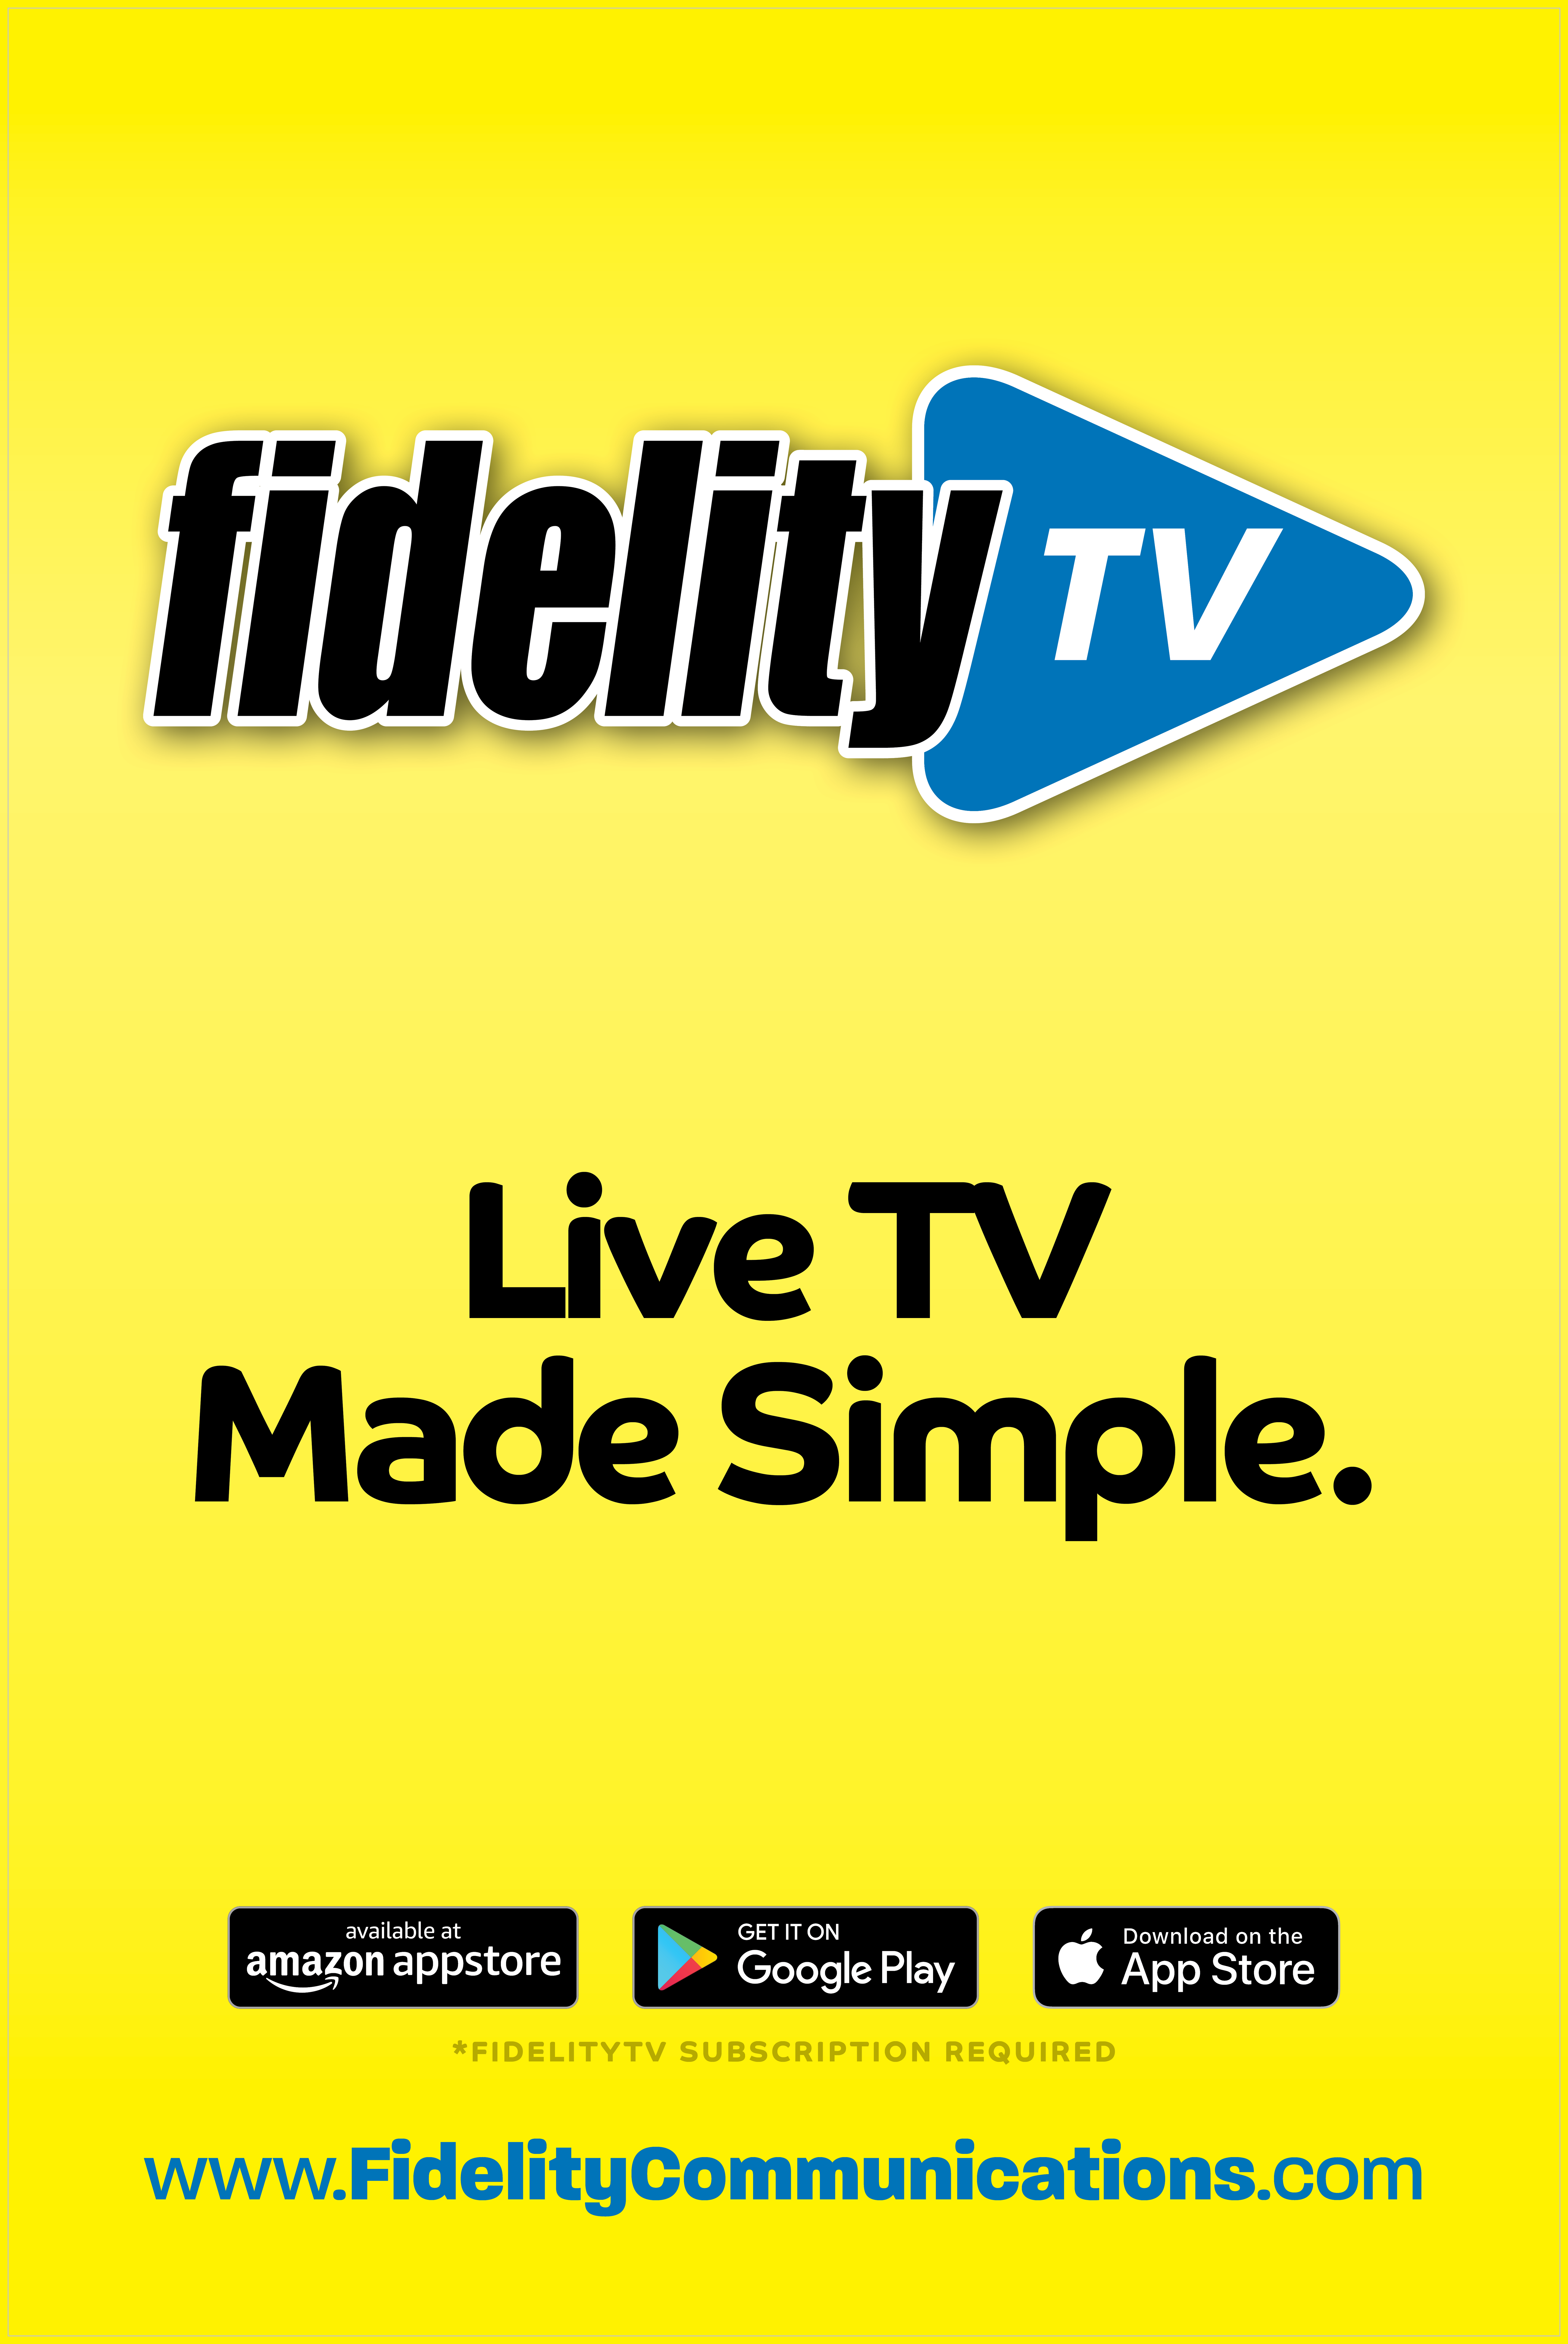 yellow sign that says Fidelity tv and live tv made simple and Fidelity subscription required and www.FidelityCommunications.com